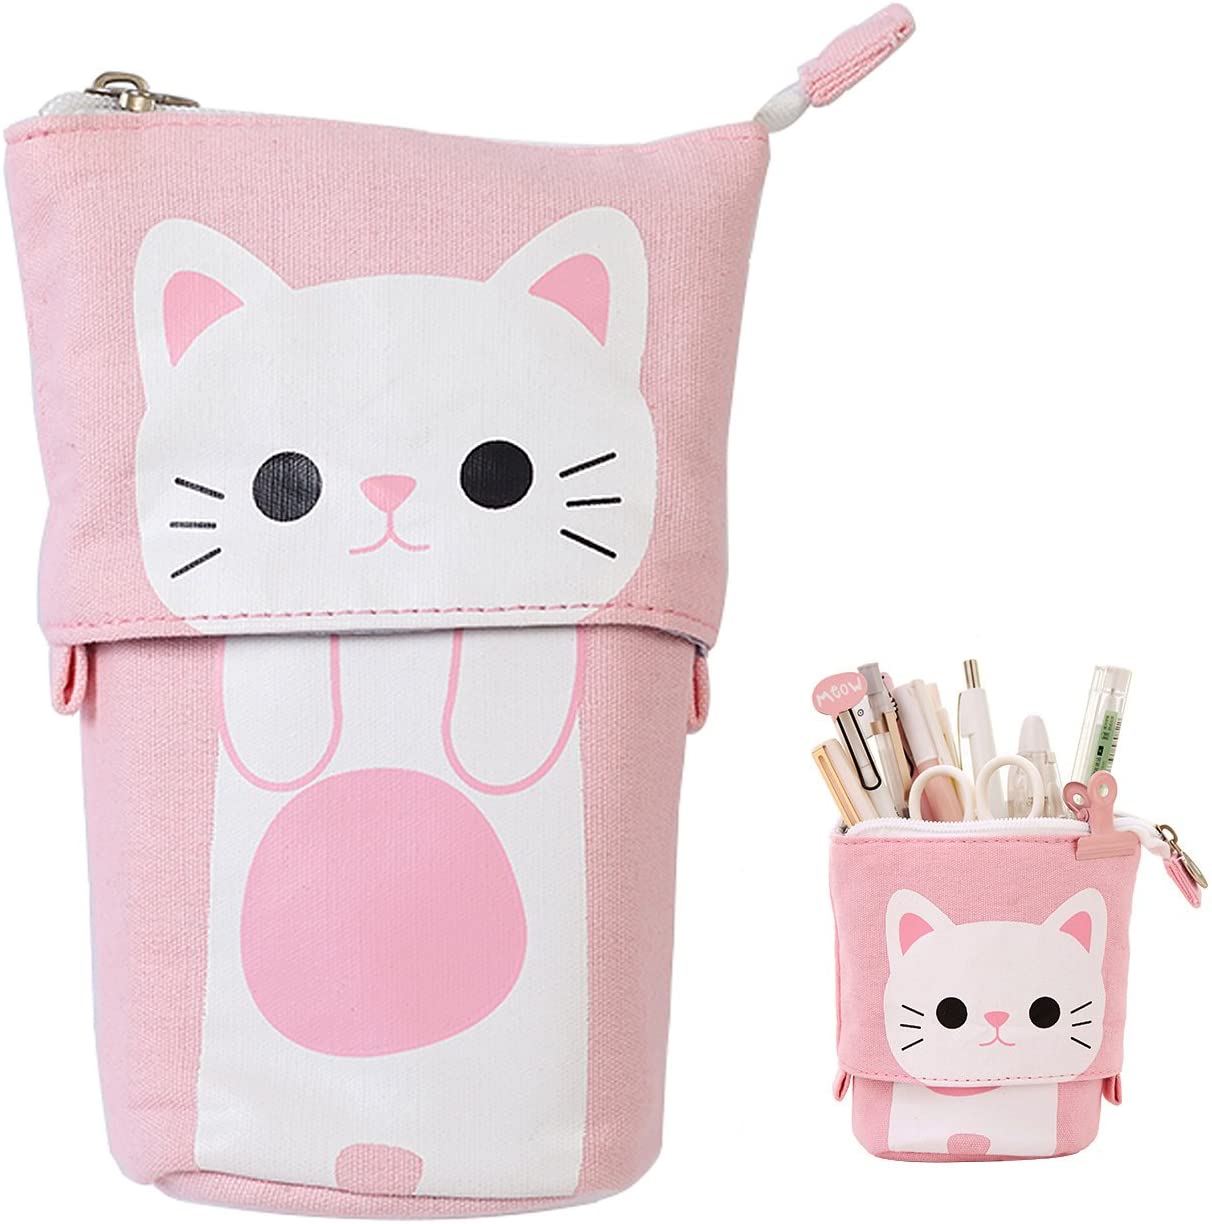 iSuperb Adorable Kitty Folding Pencil Case, 2-Pack